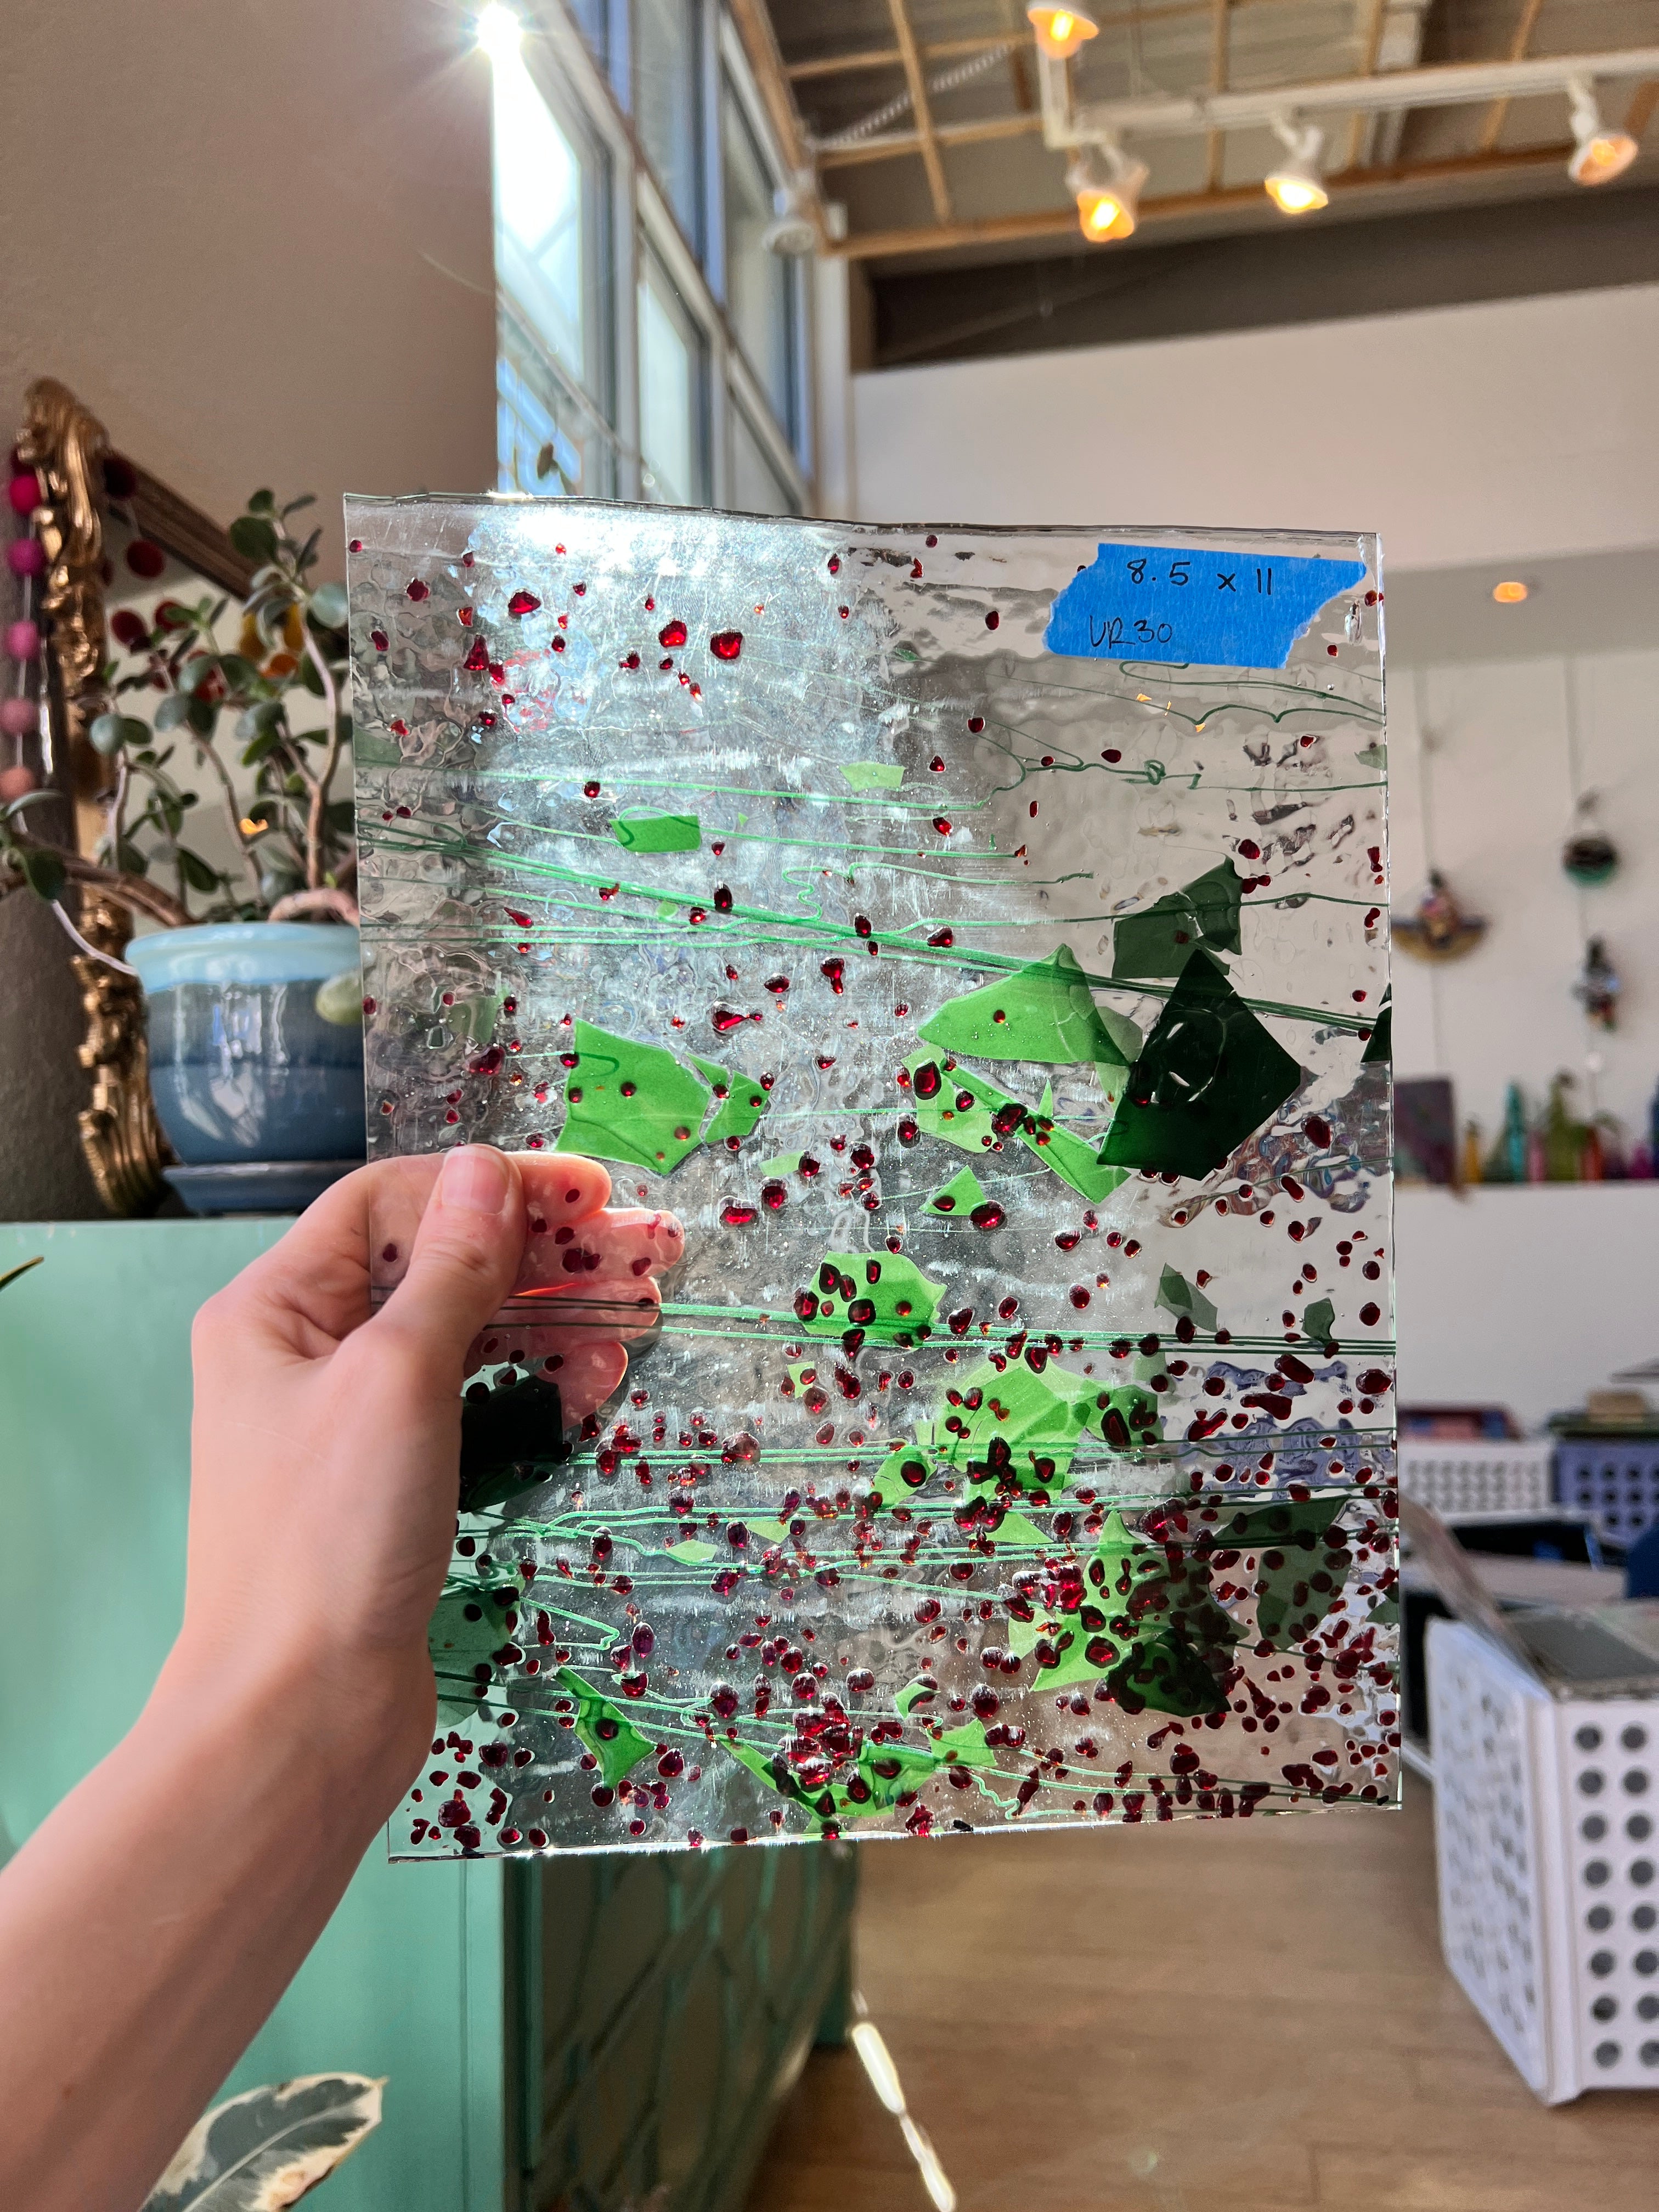 Clear With Green Confetti And Red Blobs - Uroboros Sheet Glass Colorado Glassworks   